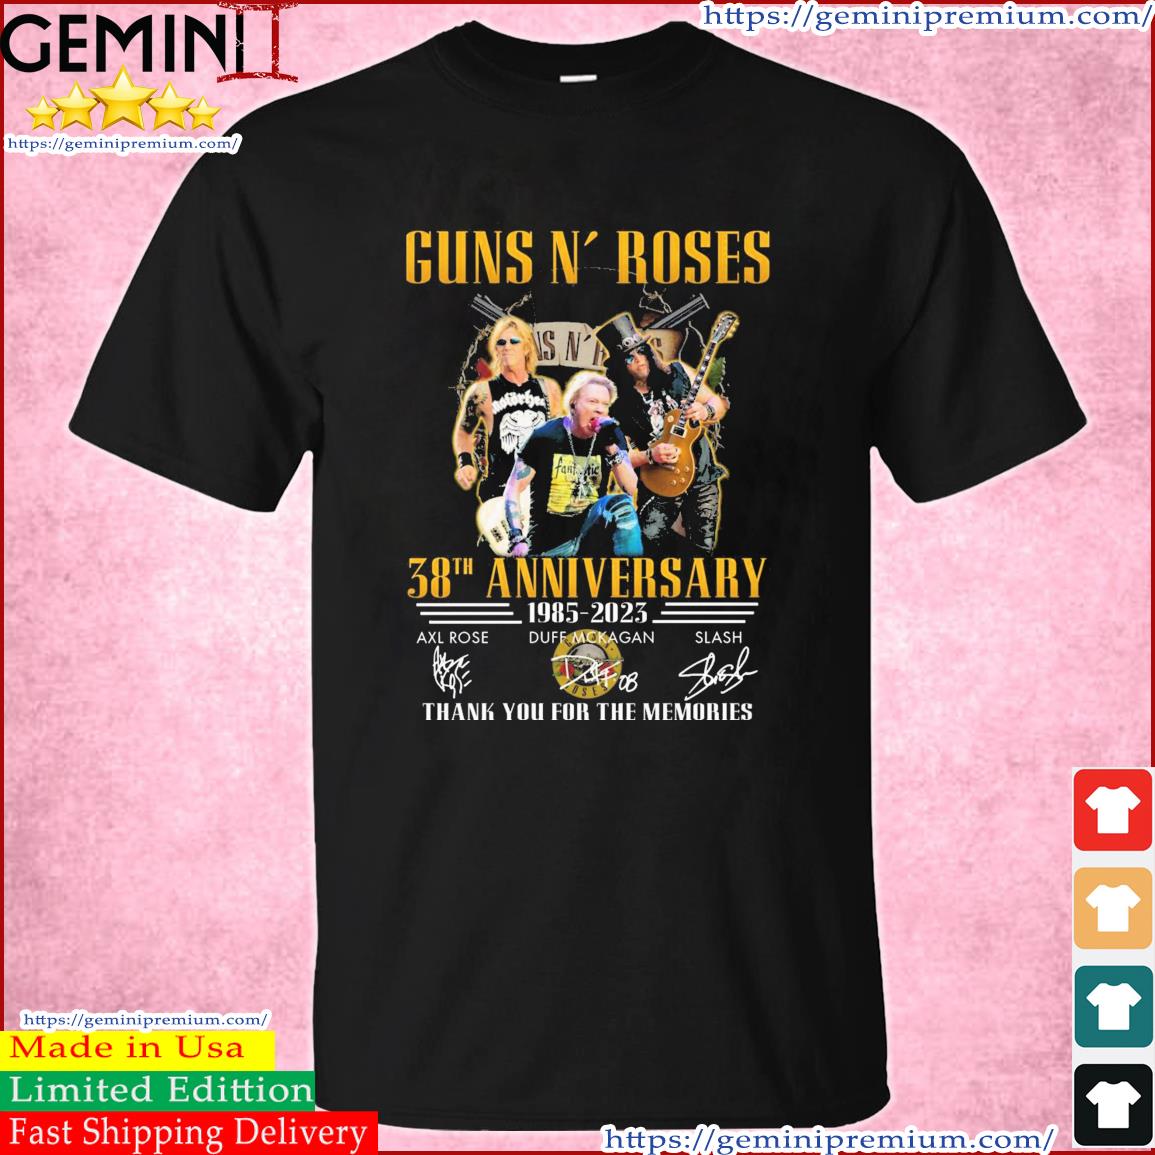 Guns N' Roses 38th Anniversary 1985-2023 Thank You For The Memories Signatures Shirt